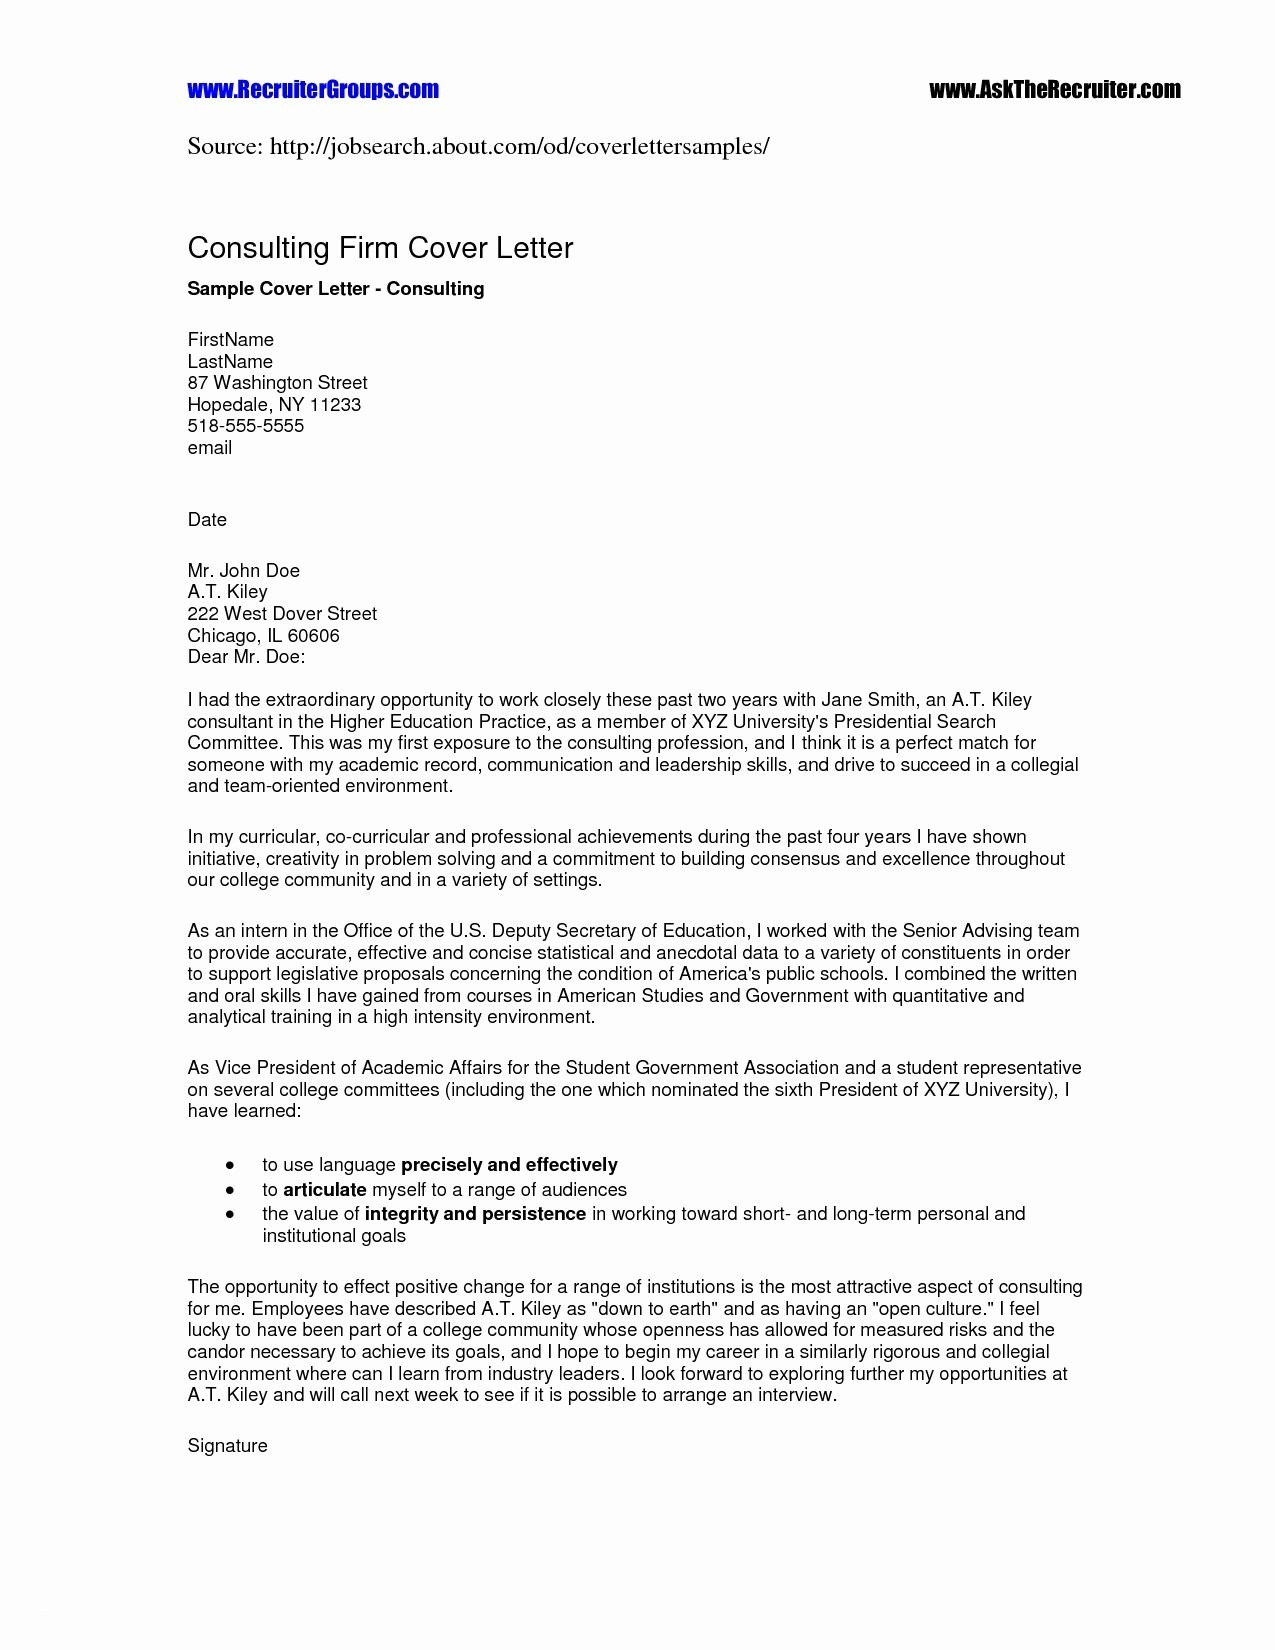 Free Employment Verification Letter Template - Free Resume for Job Application Unique Sample Cover Letter for Good